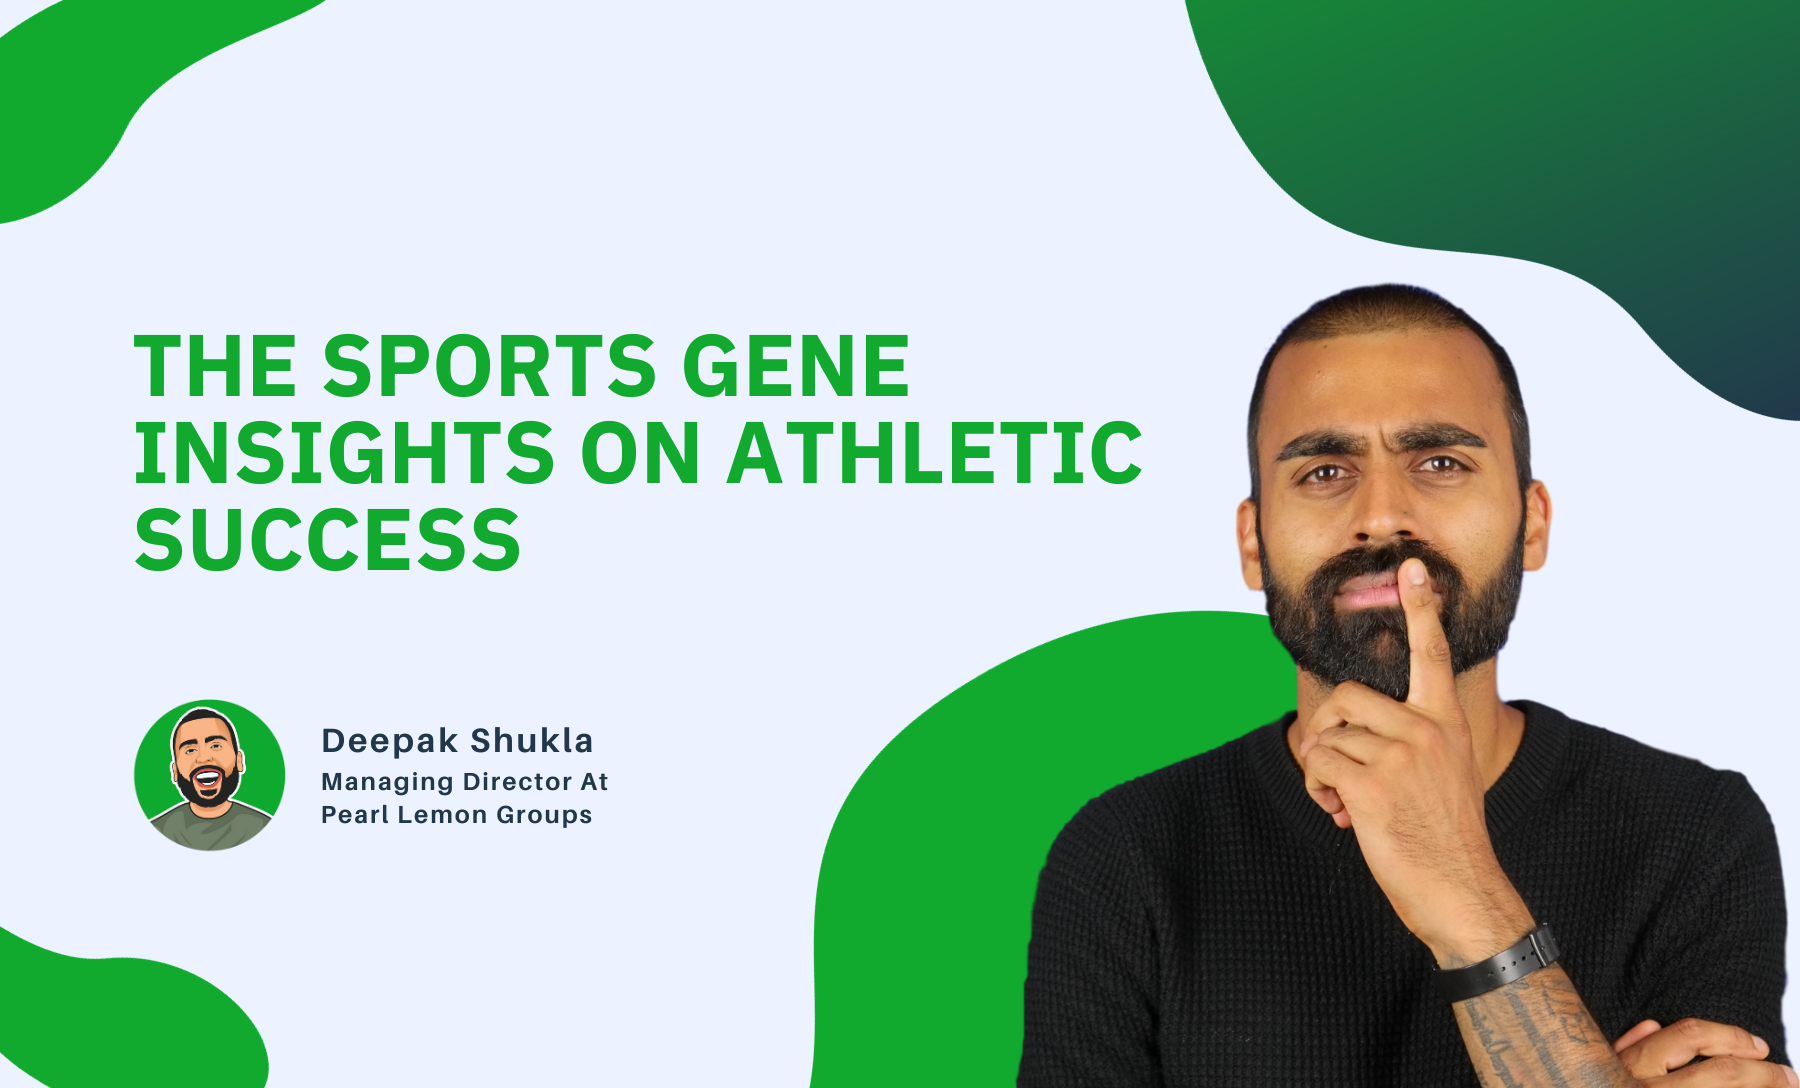 The Sports Gene Insights On Athletic Success